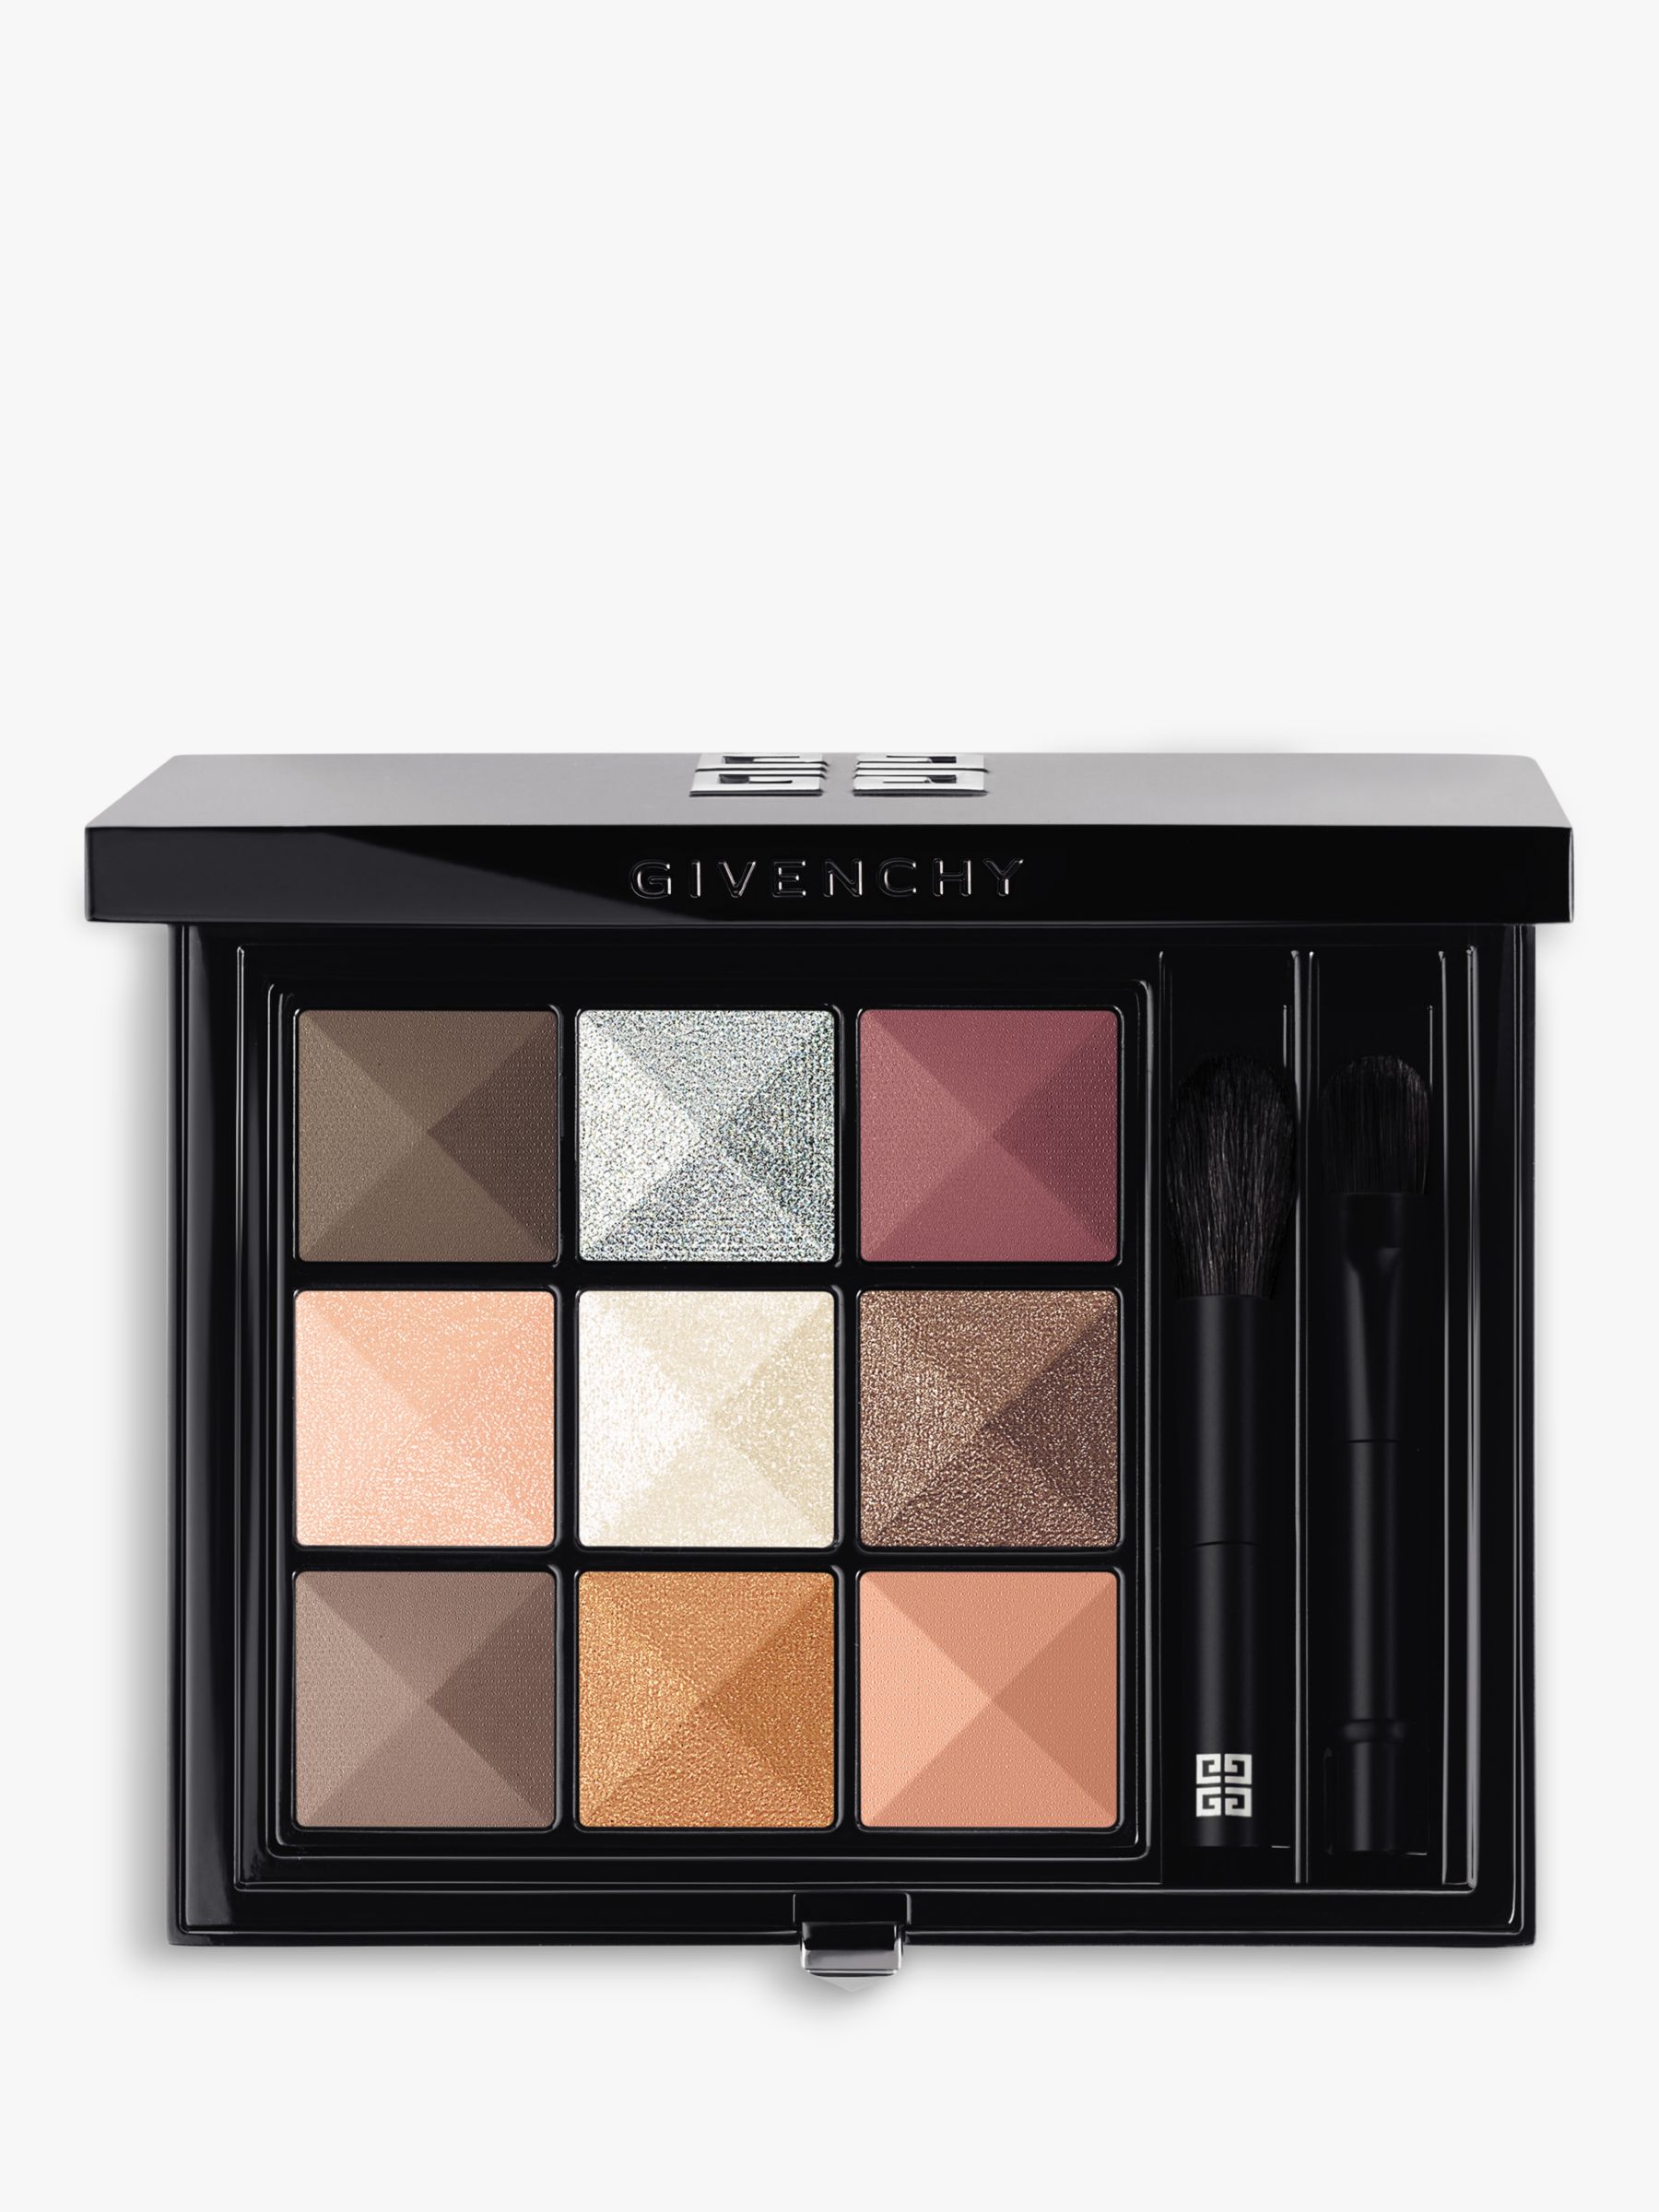 Givenchy Le 9 de Givenchy Multi-Finish Eyeshadow Palette, 9.01 1